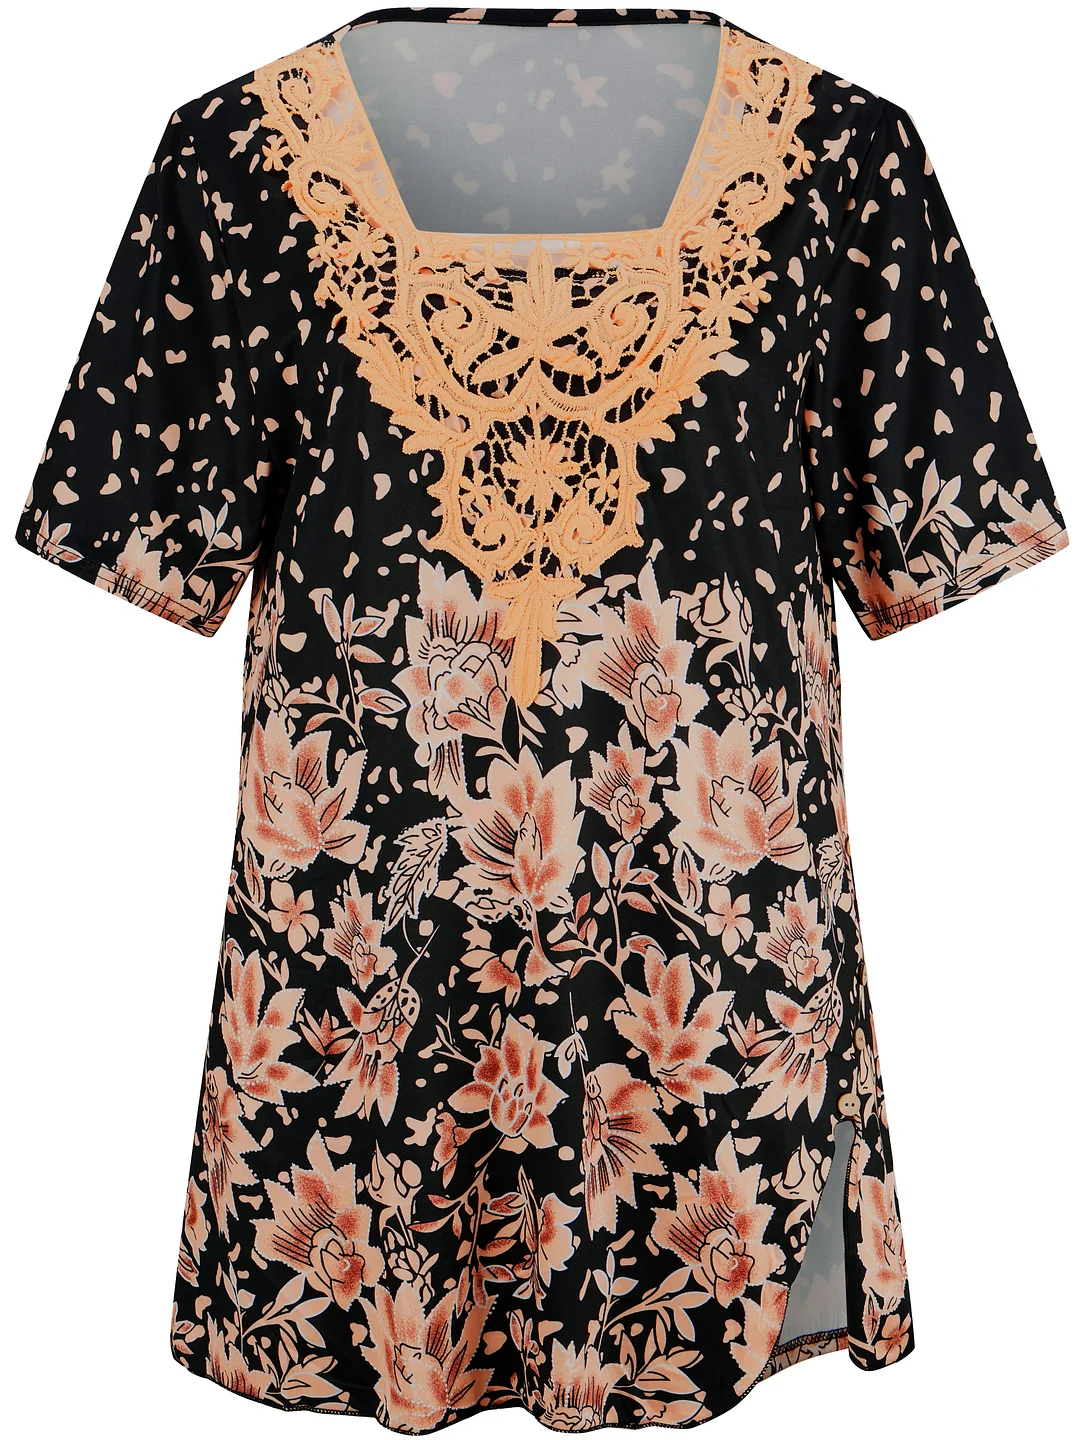 Style & Comfort for Mature Women Women's Short Sleeve U-neck Floral Printed Lace Button Top